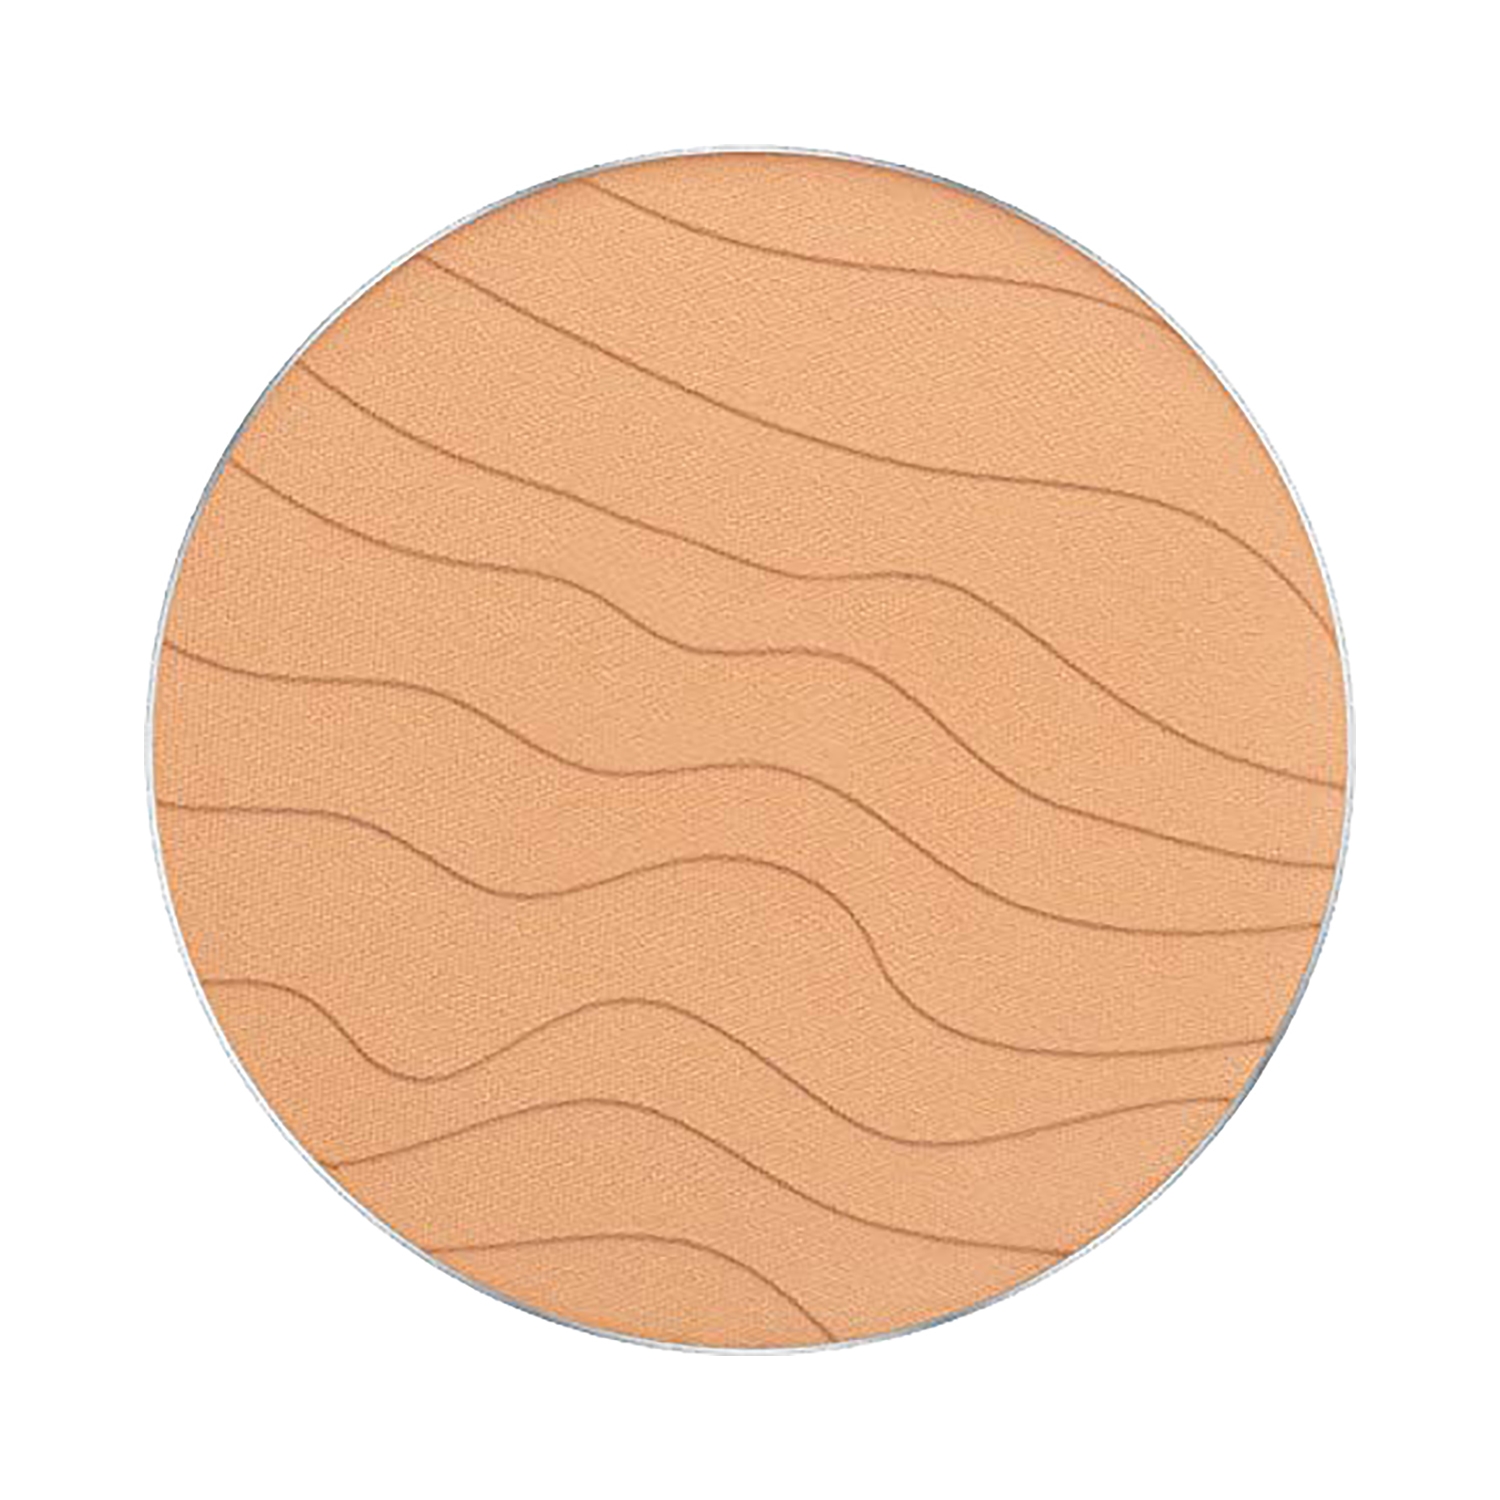 INGLOT | INGLOT Stay Hydrated Pressed Powder Freedom System - 205 Beige (9g)